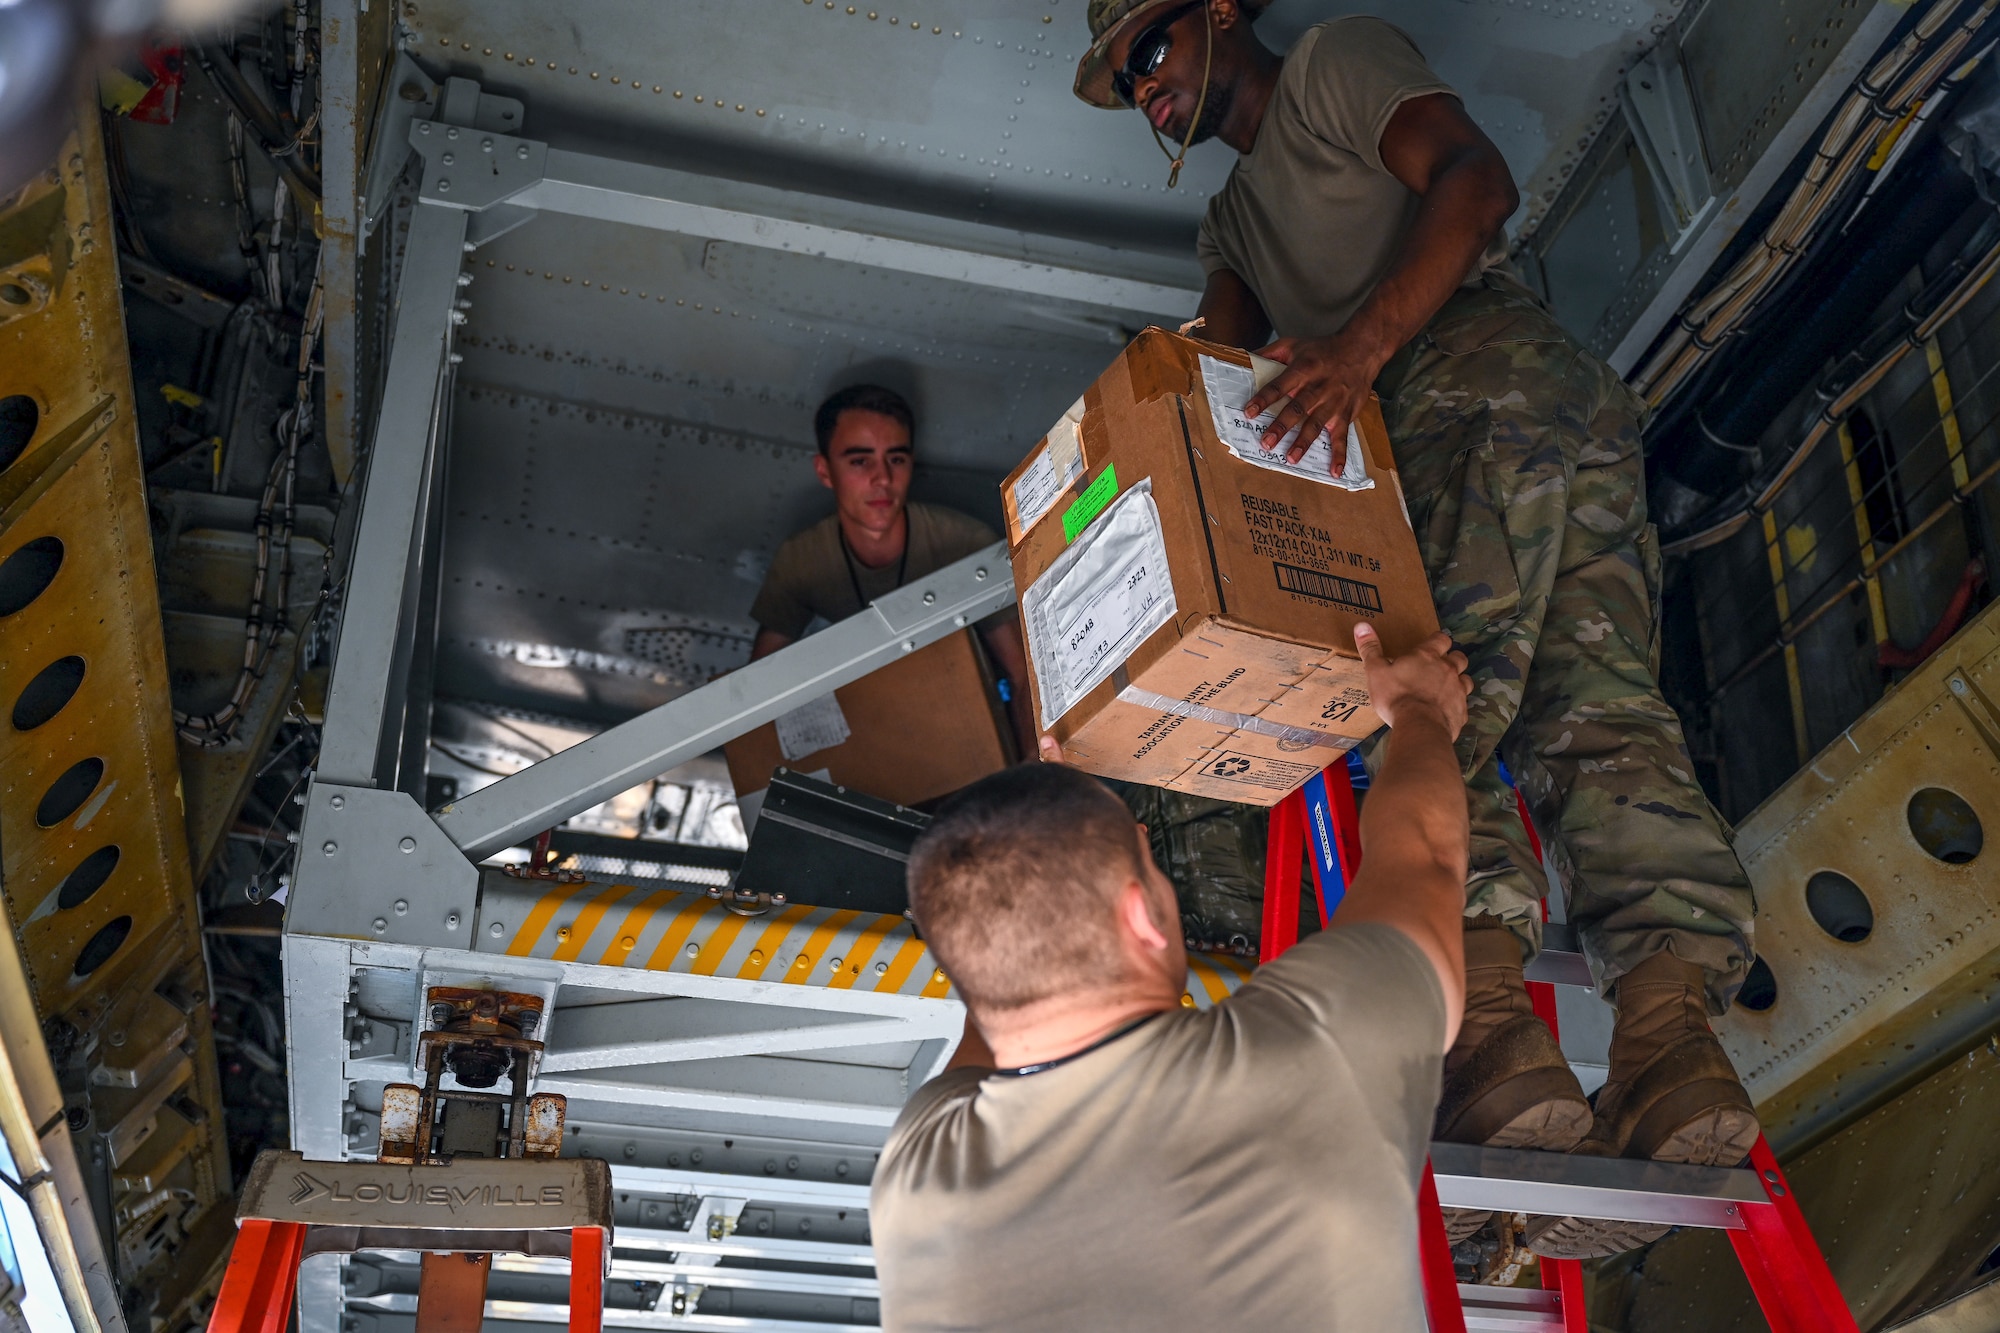 Airmen from the 2nd Aircraft Maintenance Squadron unload a B-52 On-Board Cargo System after an Agile Combat Employment Exercise at Barksdale Air Force Base, Louisiana, Aug. 19, 2022. Agile combat employment shifts generation of airpower from large, centralized bases, to networks of small, dispersed locations to increase survivability, complicate adversary planning and gain an advantage. (U.S. Air Force photo by Airman Nicole Ledbetter)